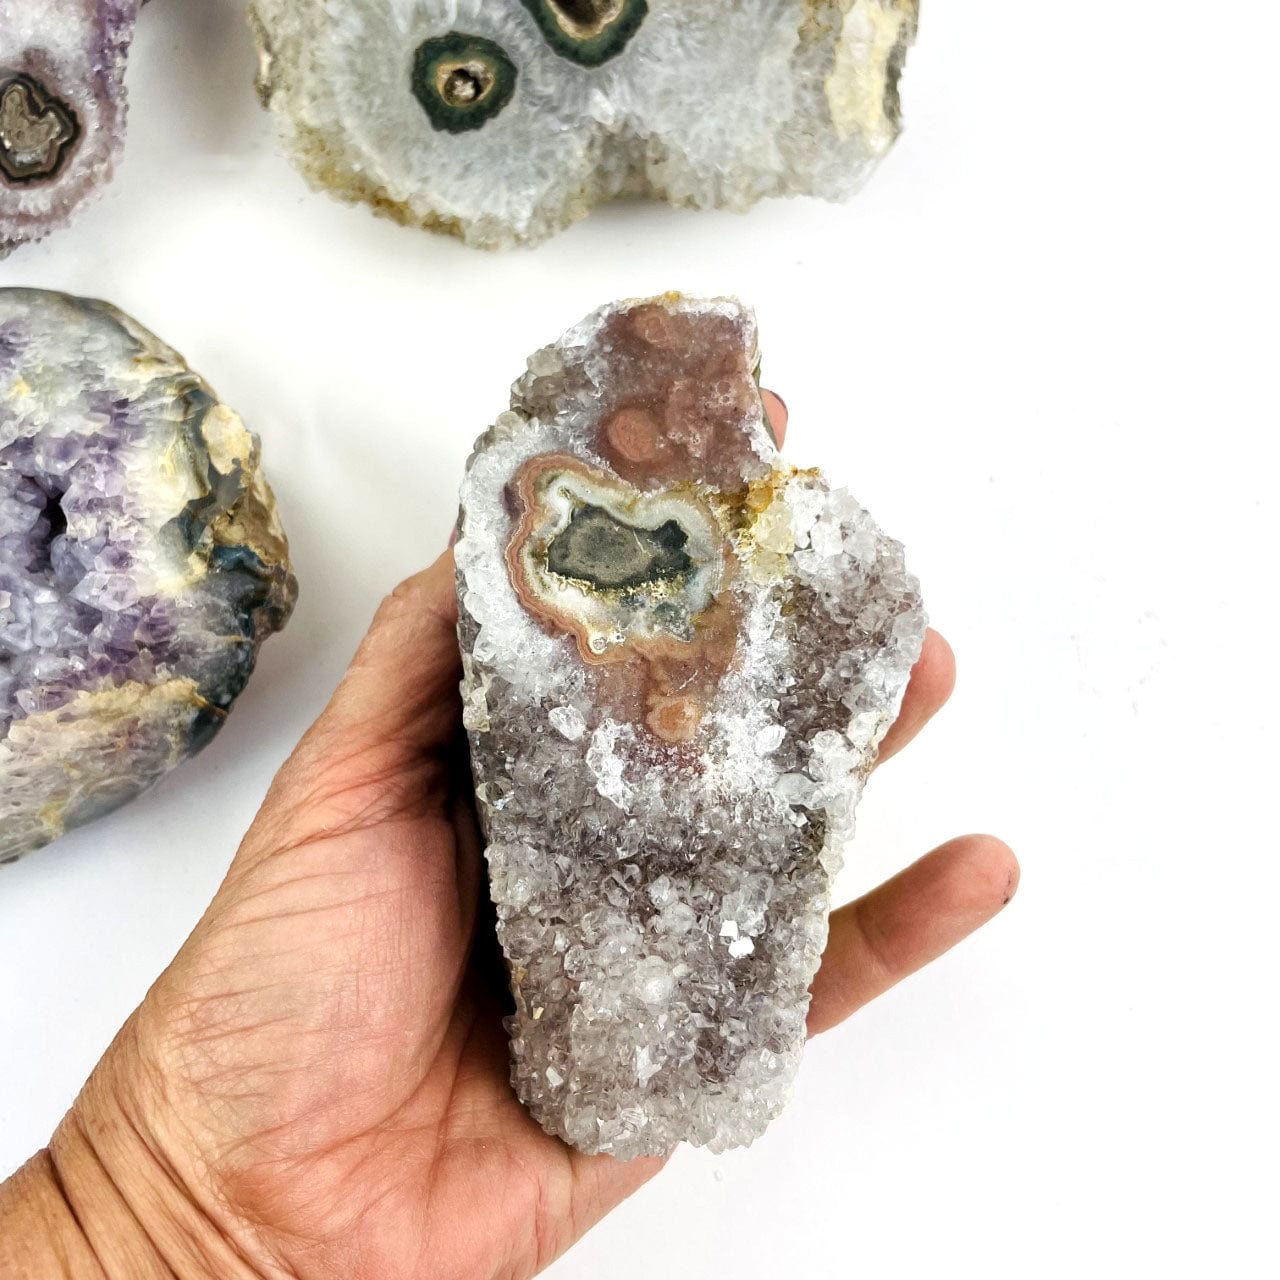  Amethyst Stalactite Druzy Cluster Geode in a hand for size